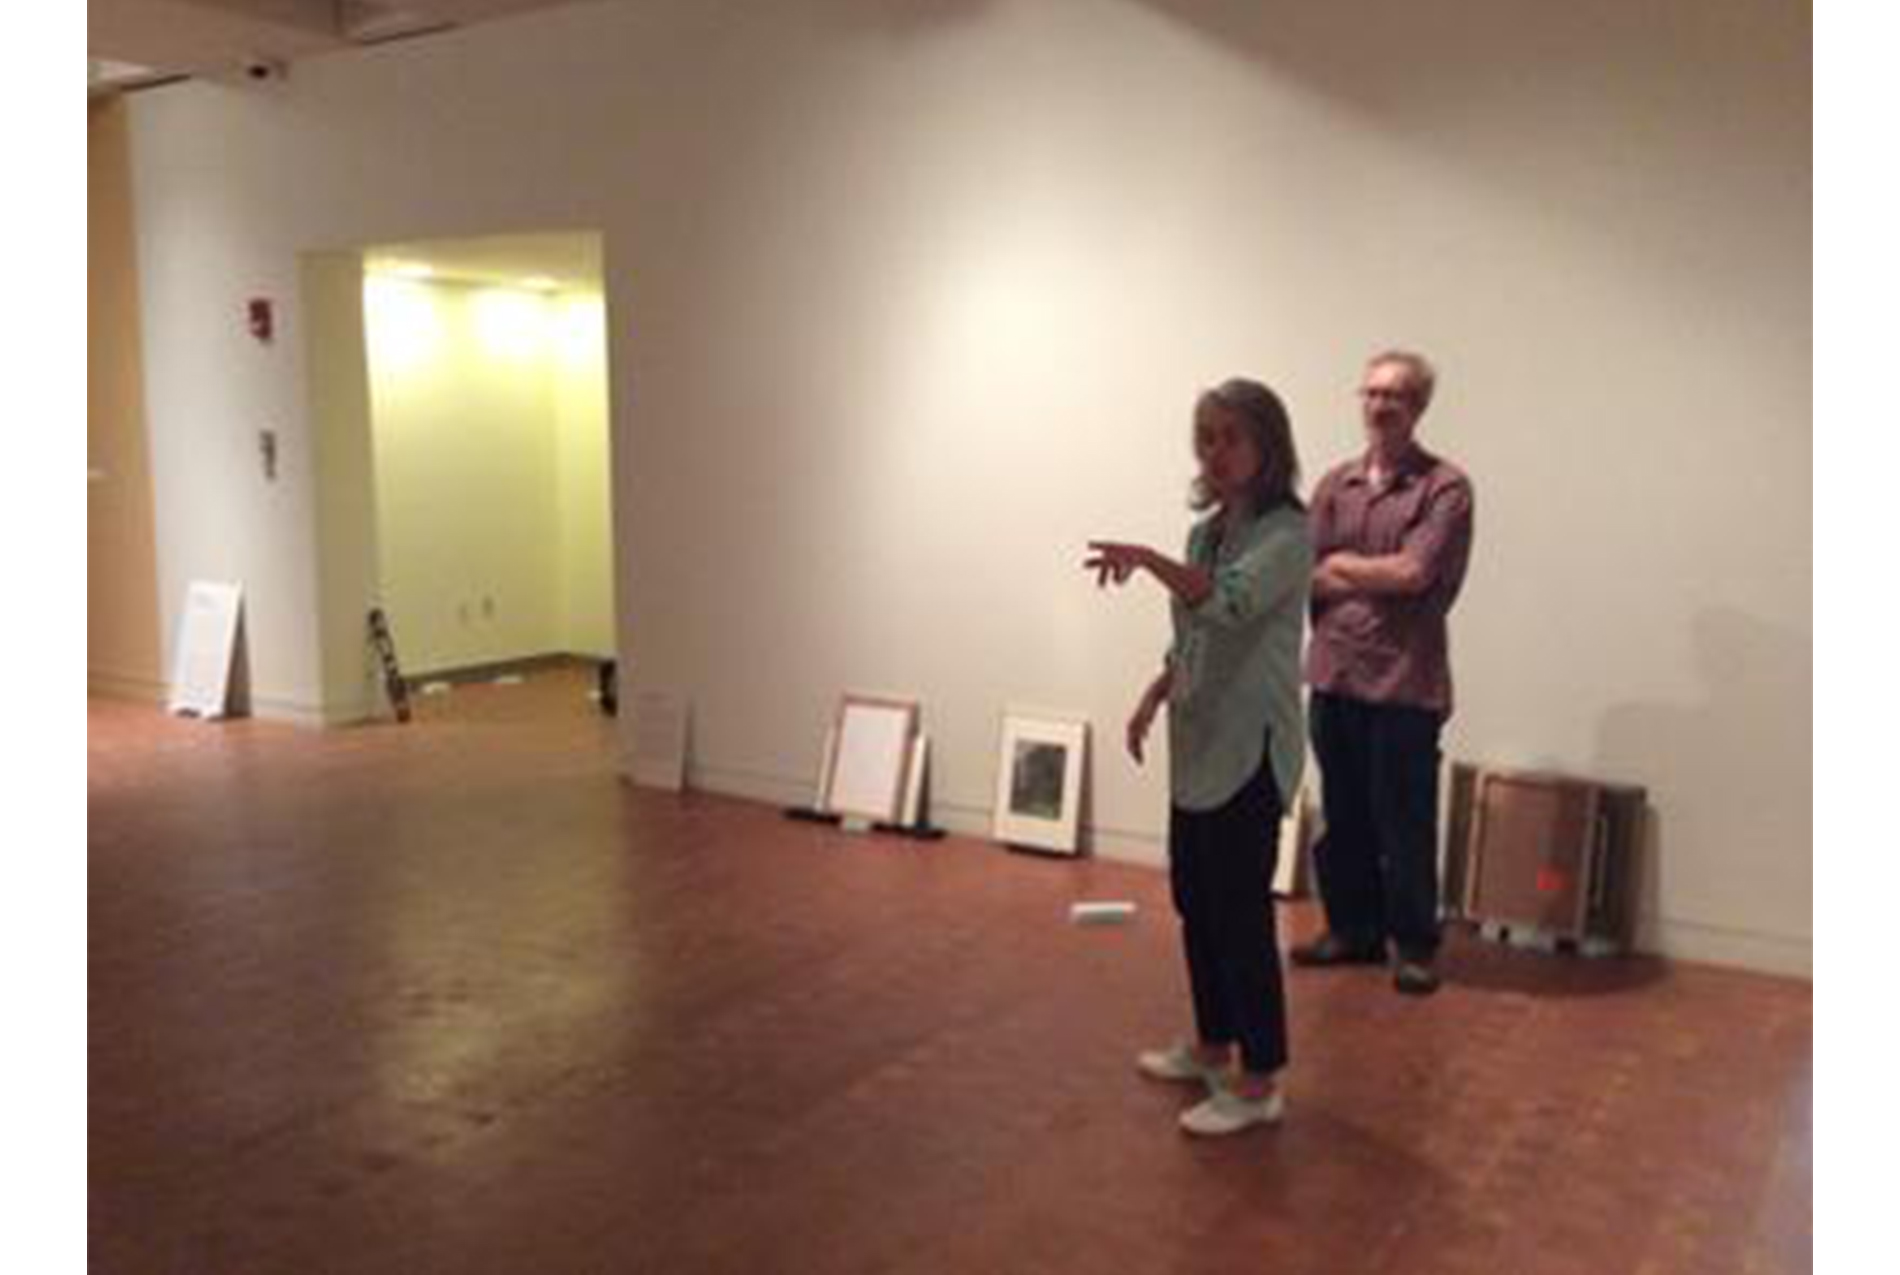 woman stands in an empty art gallery, pointing to her right. man stands behind her with his arms crossed